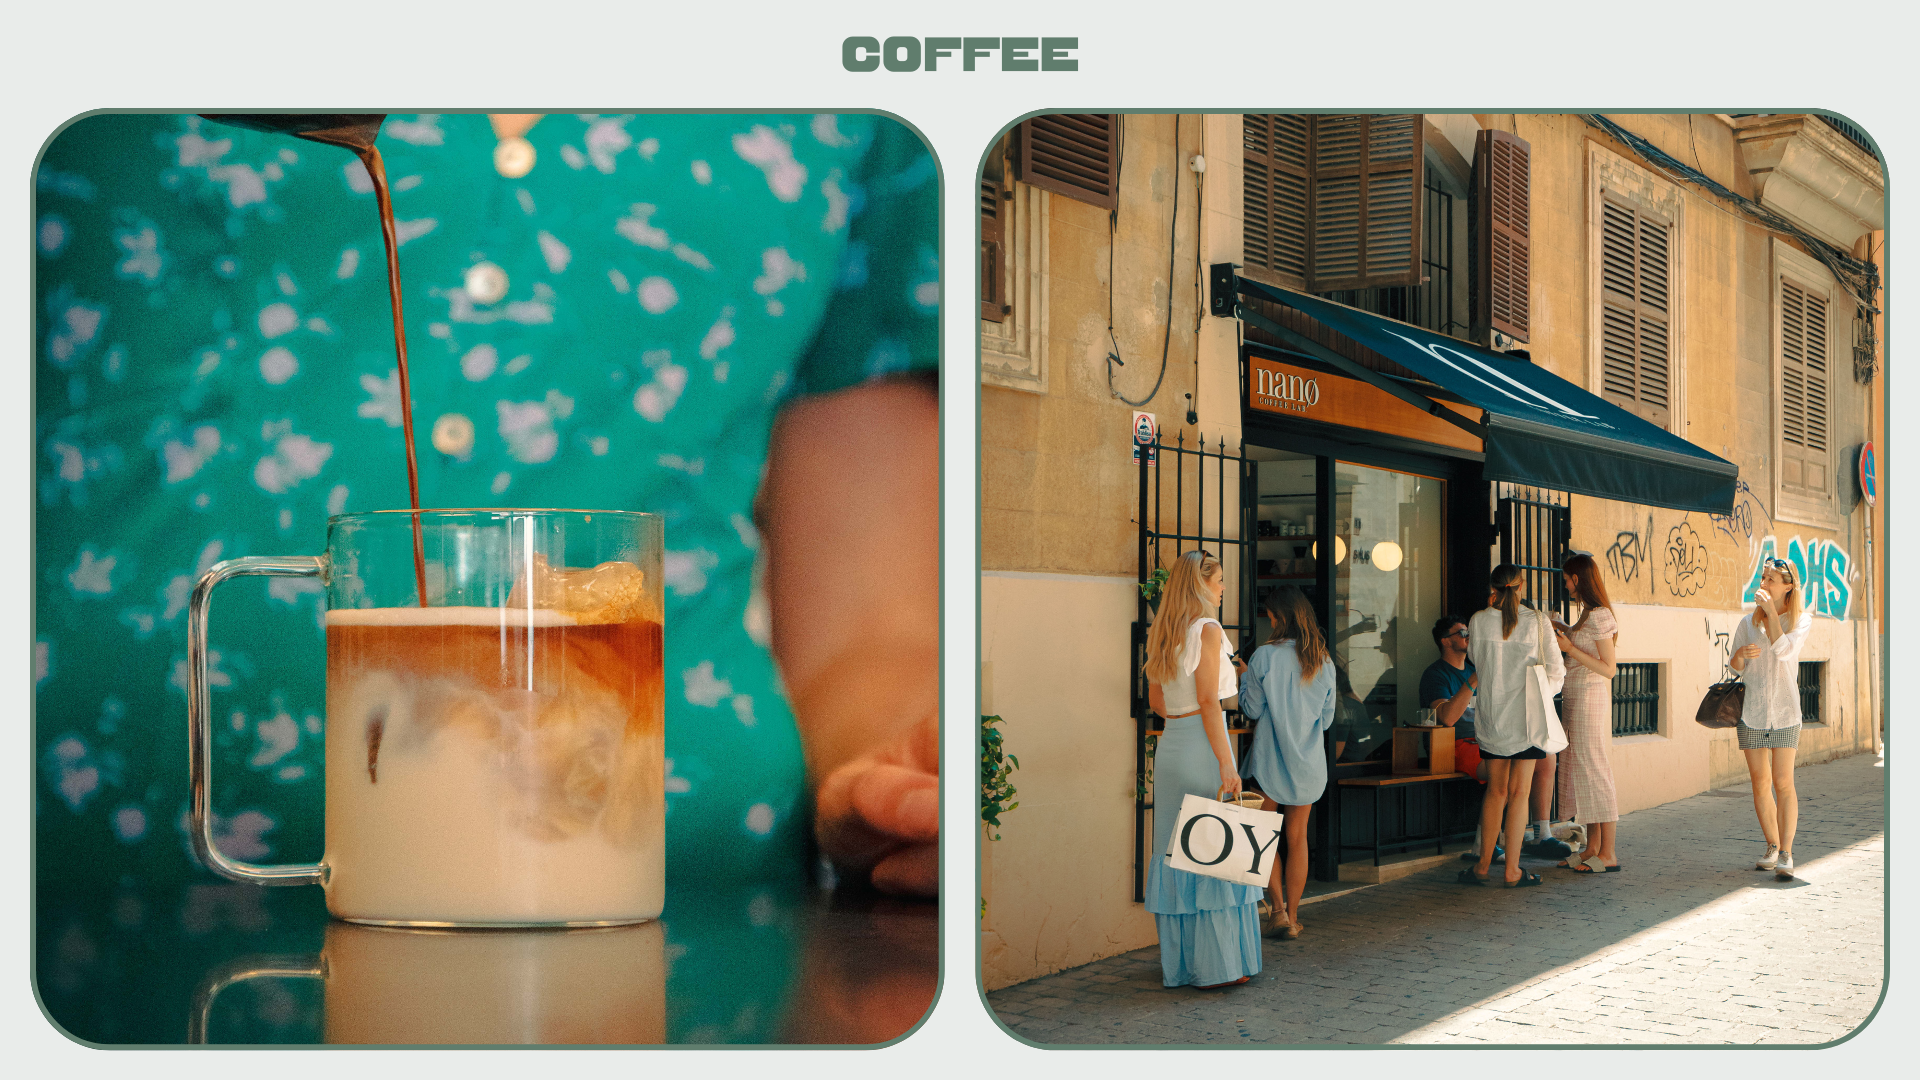 L: Iced coffee R: A small queue of women outside Palma coffee shop